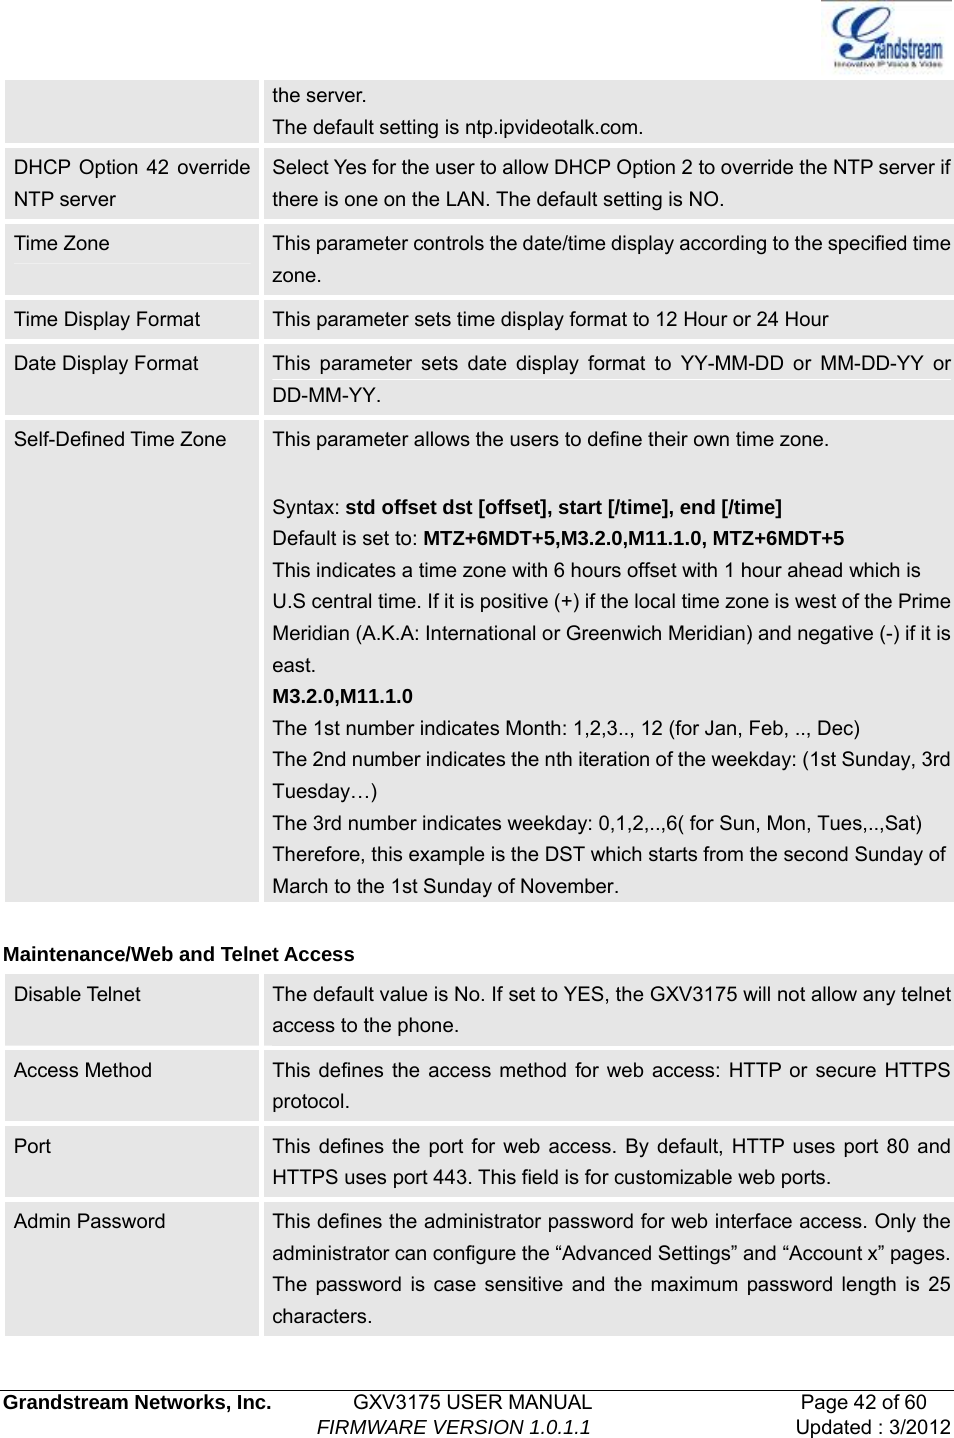   Grandstream Networks, Inc.        GXV3175 USER MANUAL                     Page 42 of 60                                FIRMWARE VERSION 1.0.1.1 Updated : 3/2012  the server.   The default setting is ntp.ipvideotalk.com.   DHCP Option 42 override NTP server Select Yes for the user to allow DHCP Option 2 to override the NTP server if there is one on the LAN. The default setting is NO. Time Zone  This parameter controls the date/time display according to the specified time zone. Time Display Format  This parameter sets time display format to 12 Hour or 24 Hour Date Display Format  This parameter sets date display format to YY-MM-DD or MM-DD-YY or DD-MM-YY. Self-Defined Time Zone  This parameter allows the users to define their own time zone.    Syntax: std offset dst [offset], start [/time], end [/time] Default is set to: MTZ+6MDT+5,M3.2.0,M11.1.0, MTZ+6MDT+5 This indicates a time zone with 6 hours offset with 1 hour ahead which is U.S central time. If it is positive (+) if the local time zone is west of the Prime Meridian (A.K.A: International or Greenwich Meridian) and negative (-) if it is east. M3.2.0,M11.1.0 The 1st number indicates Month: 1,2,3.., 12 (for Jan, Feb, .., Dec) The 2nd number indicates the nth iteration of the weekday: (1st Sunday, 3rd Tuesday…) The 3rd number indicates weekday: 0,1,2,..,6( for Sun, Mon, Tues,..,Sat) Therefore, this example is the DST which starts from the second Sunday of March to the 1st Sunday of November.  Maintenance/Web and Telnet Access Disable Telnet    The default value is No. If set to YES, the GXV3175 will not allow any telnet access to the phone.   Access Method  This defines the access method for web access: HTTP or secure HTTPS protocol. Port  This defines the port for web access. By default, HTTP uses port 80 and HTTPS uses port 443. This field is for customizable web ports. Admin Password  This defines the administrator password for web interface access. Only the administrator can configure the “Advanced Settings” and “Account x” pages. The password is case sensitive and the maximum password length is 25 characters. 